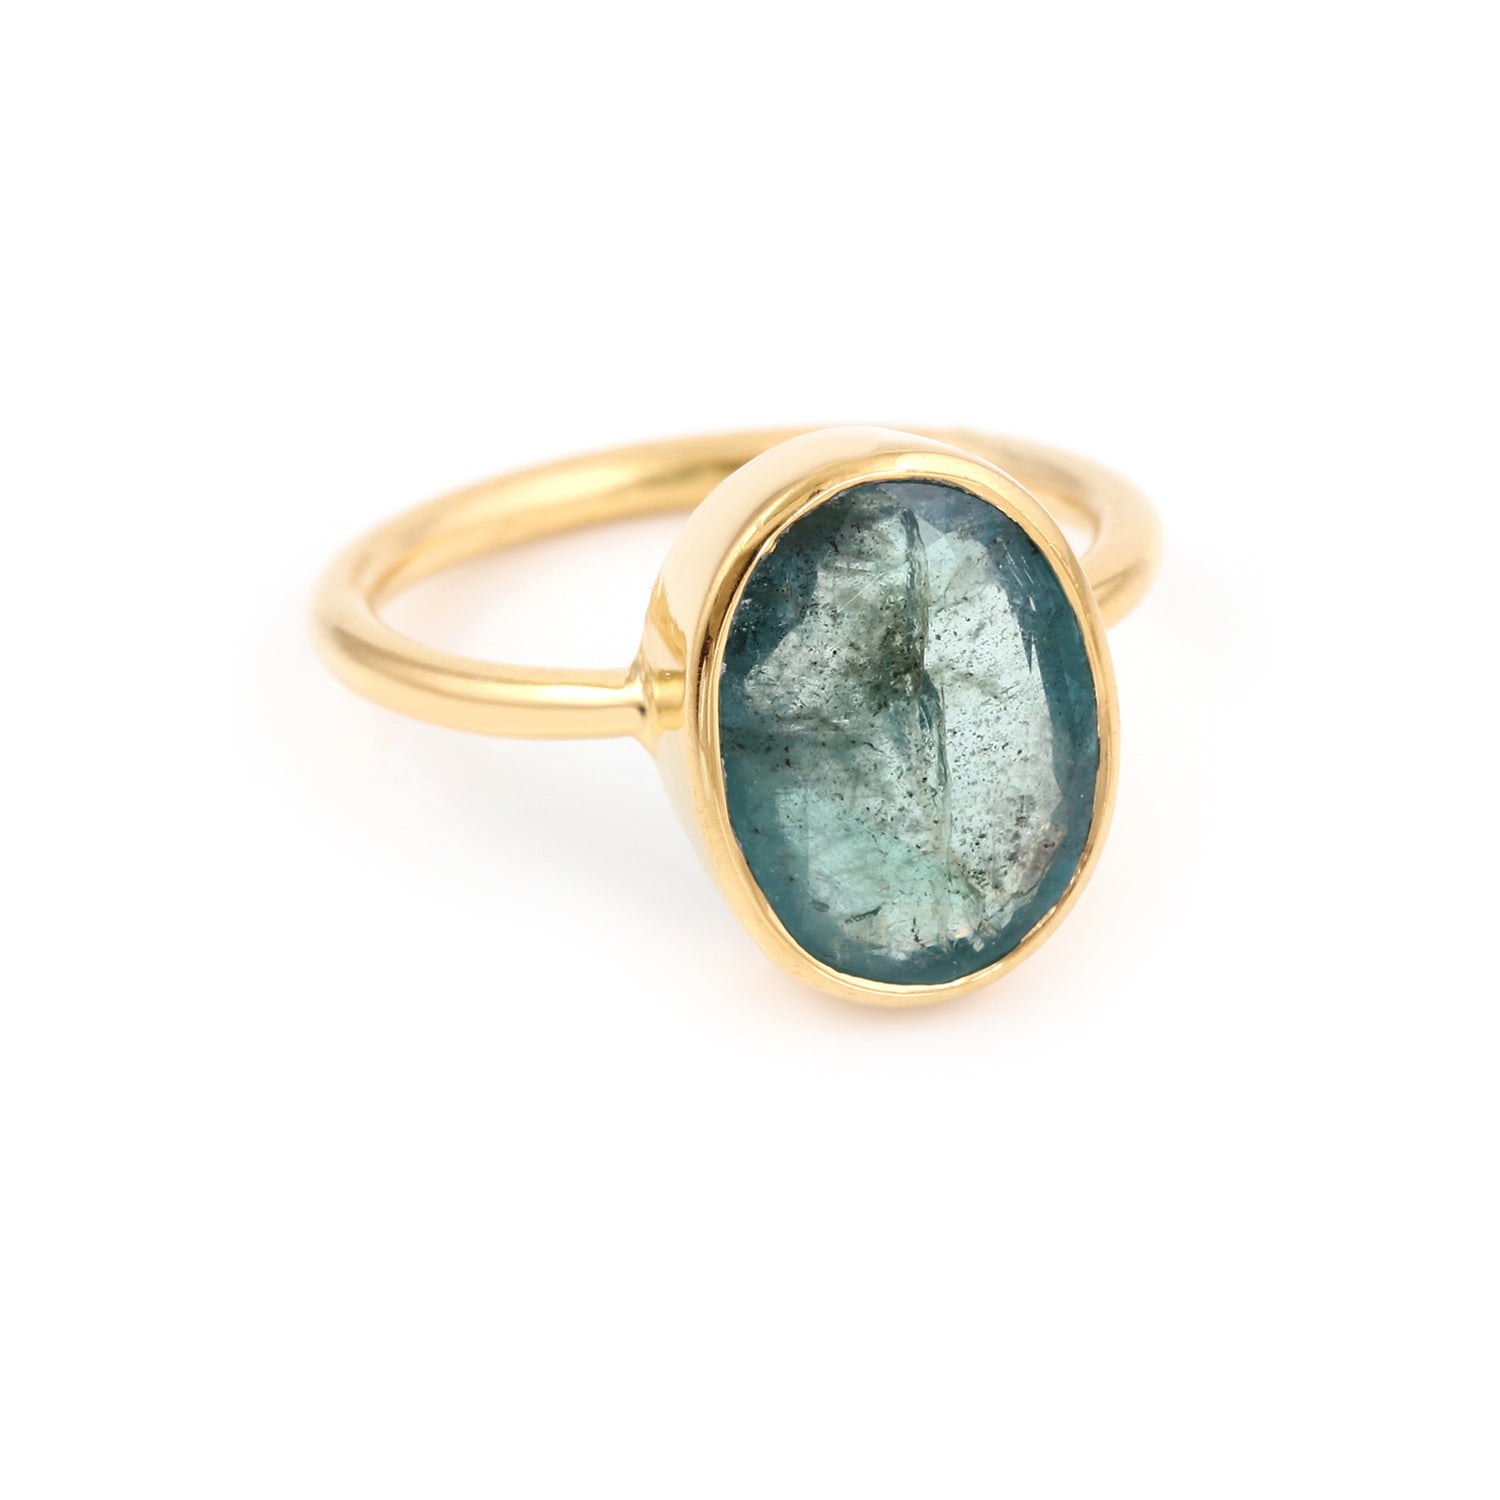 Emerald Oval Signet Ring